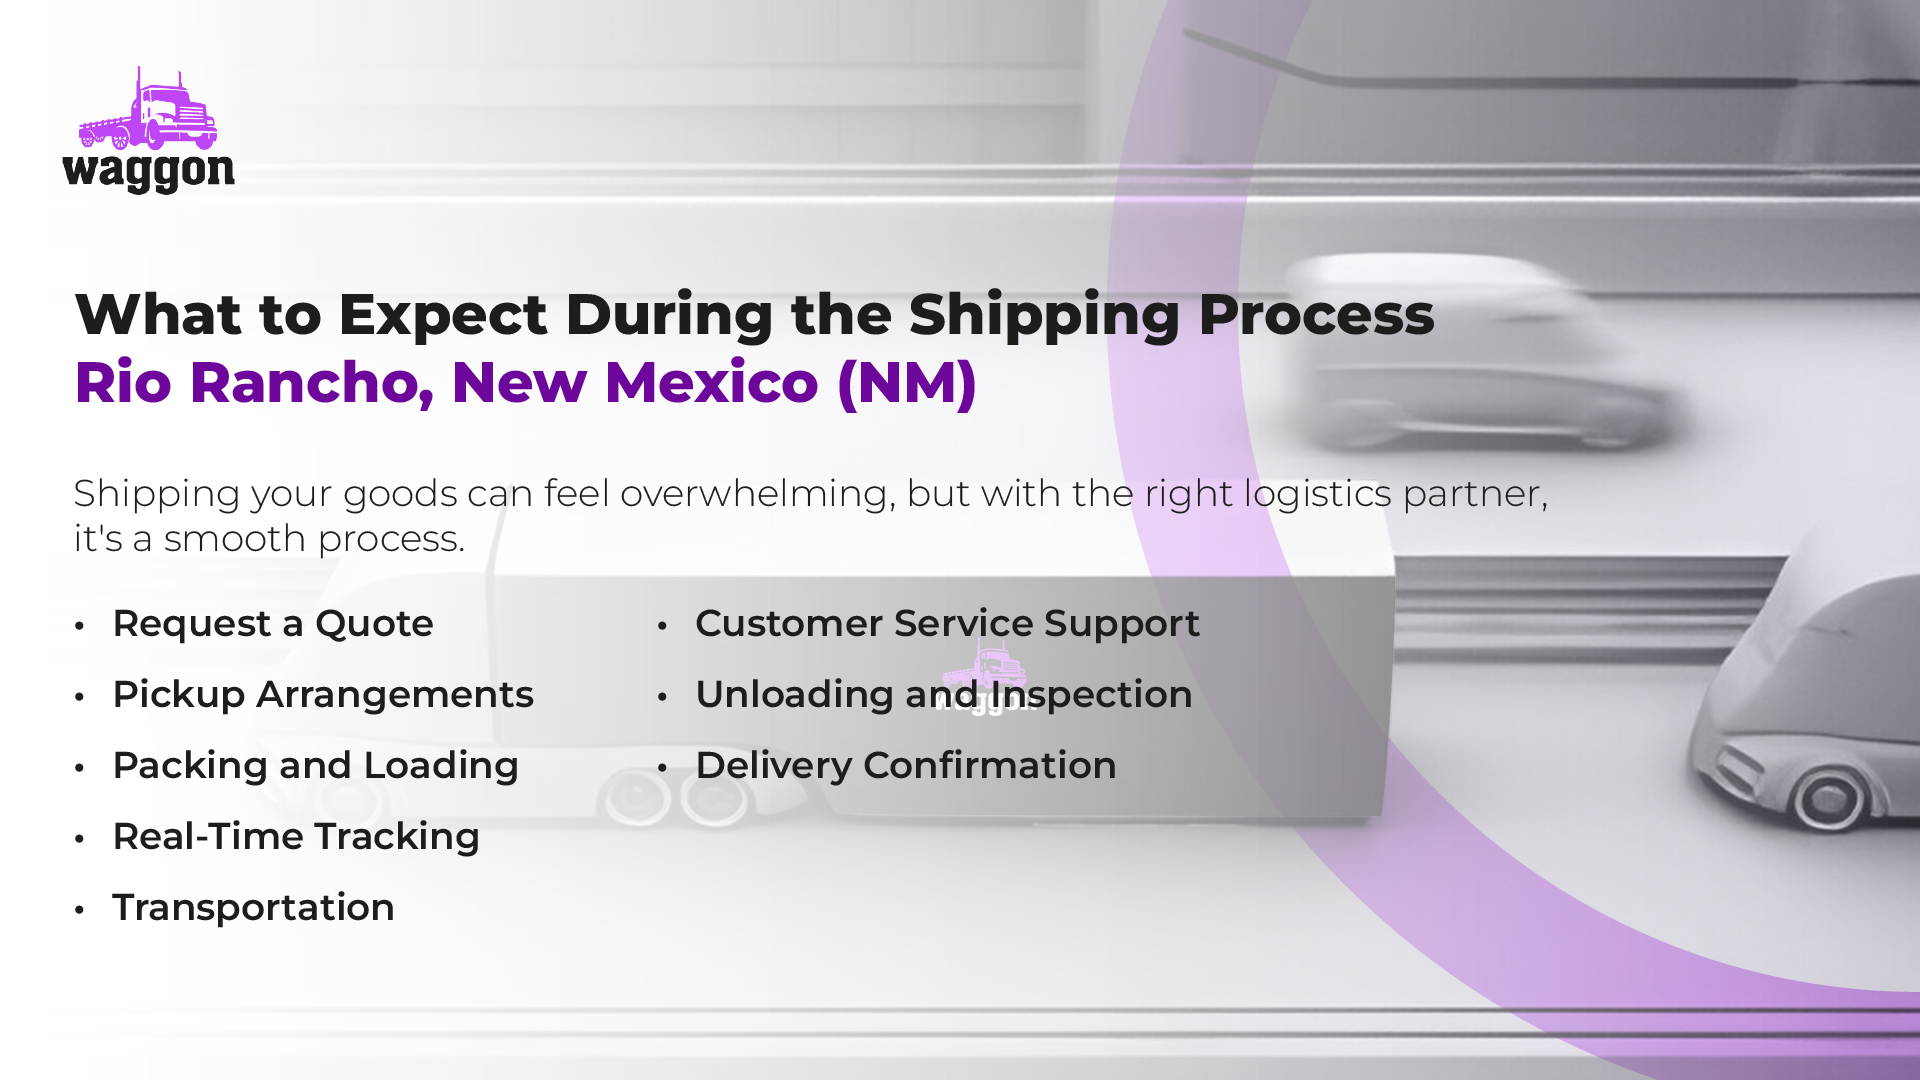 What to Expect During the Shipping Process